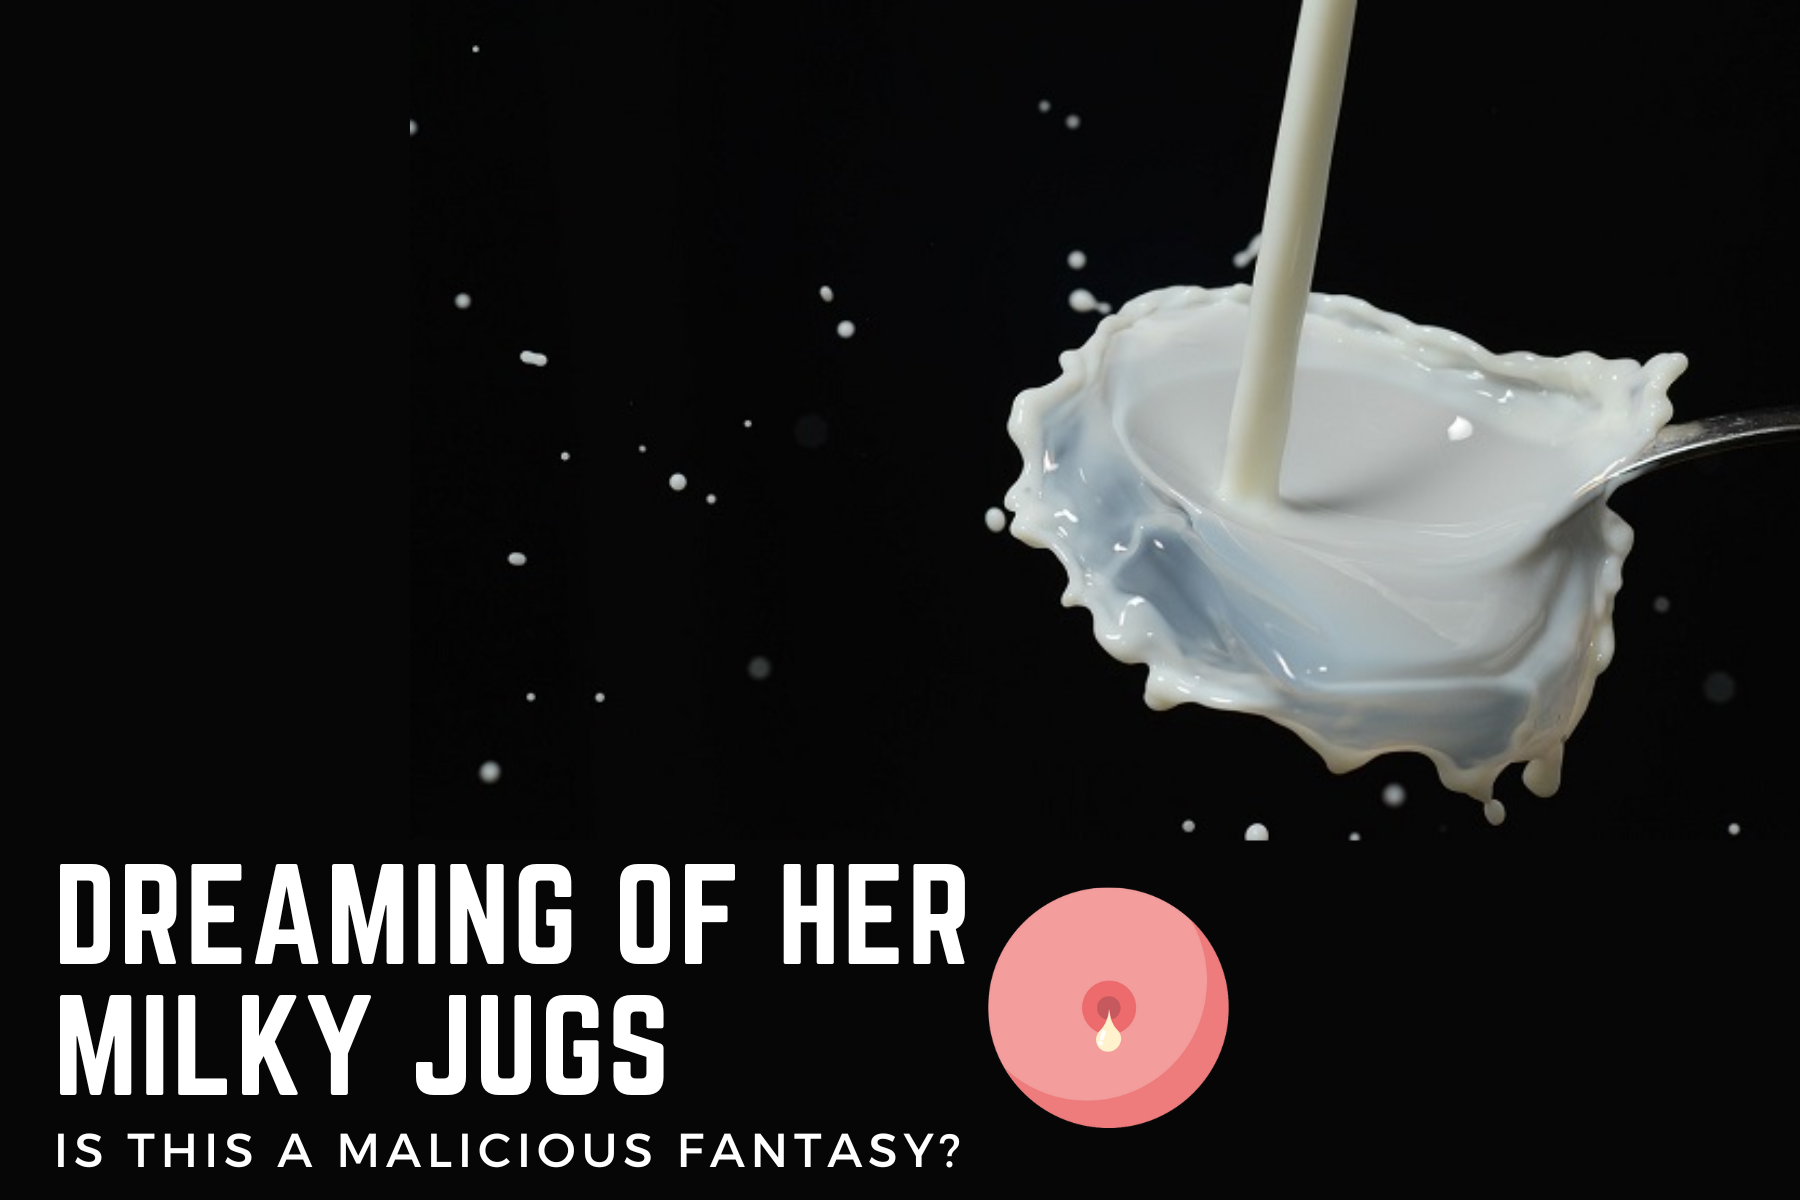 Dreaming Of Her Milky Jugs - Is This A Malicious Fantasy?